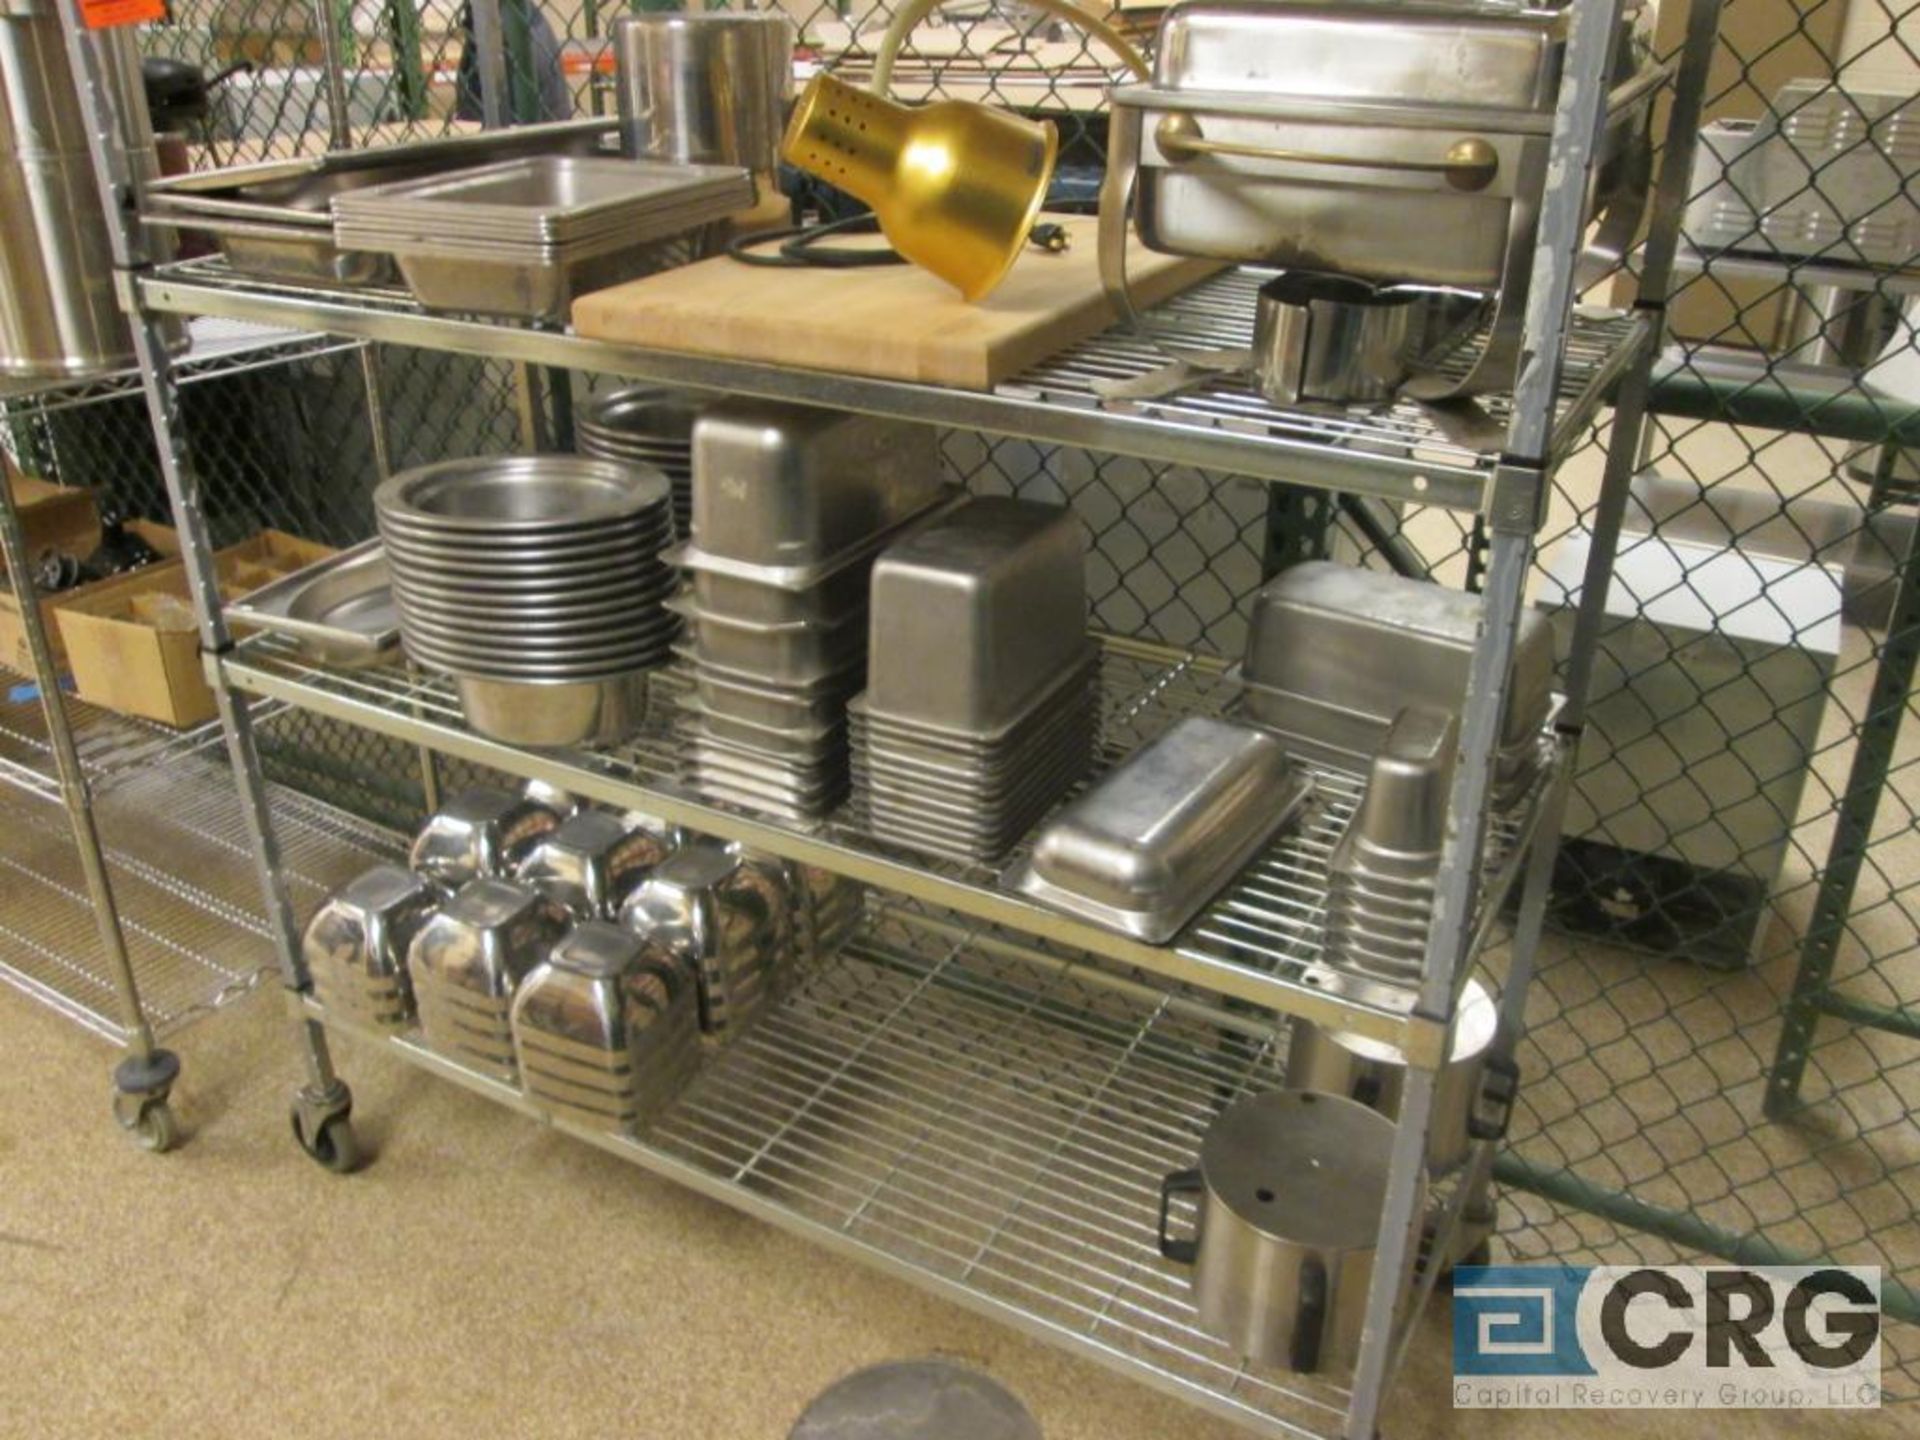 Lot, includes - 3 asst portable Metro racks with contents - asst coffee pots, dispensers, chafers, - Image 4 of 4